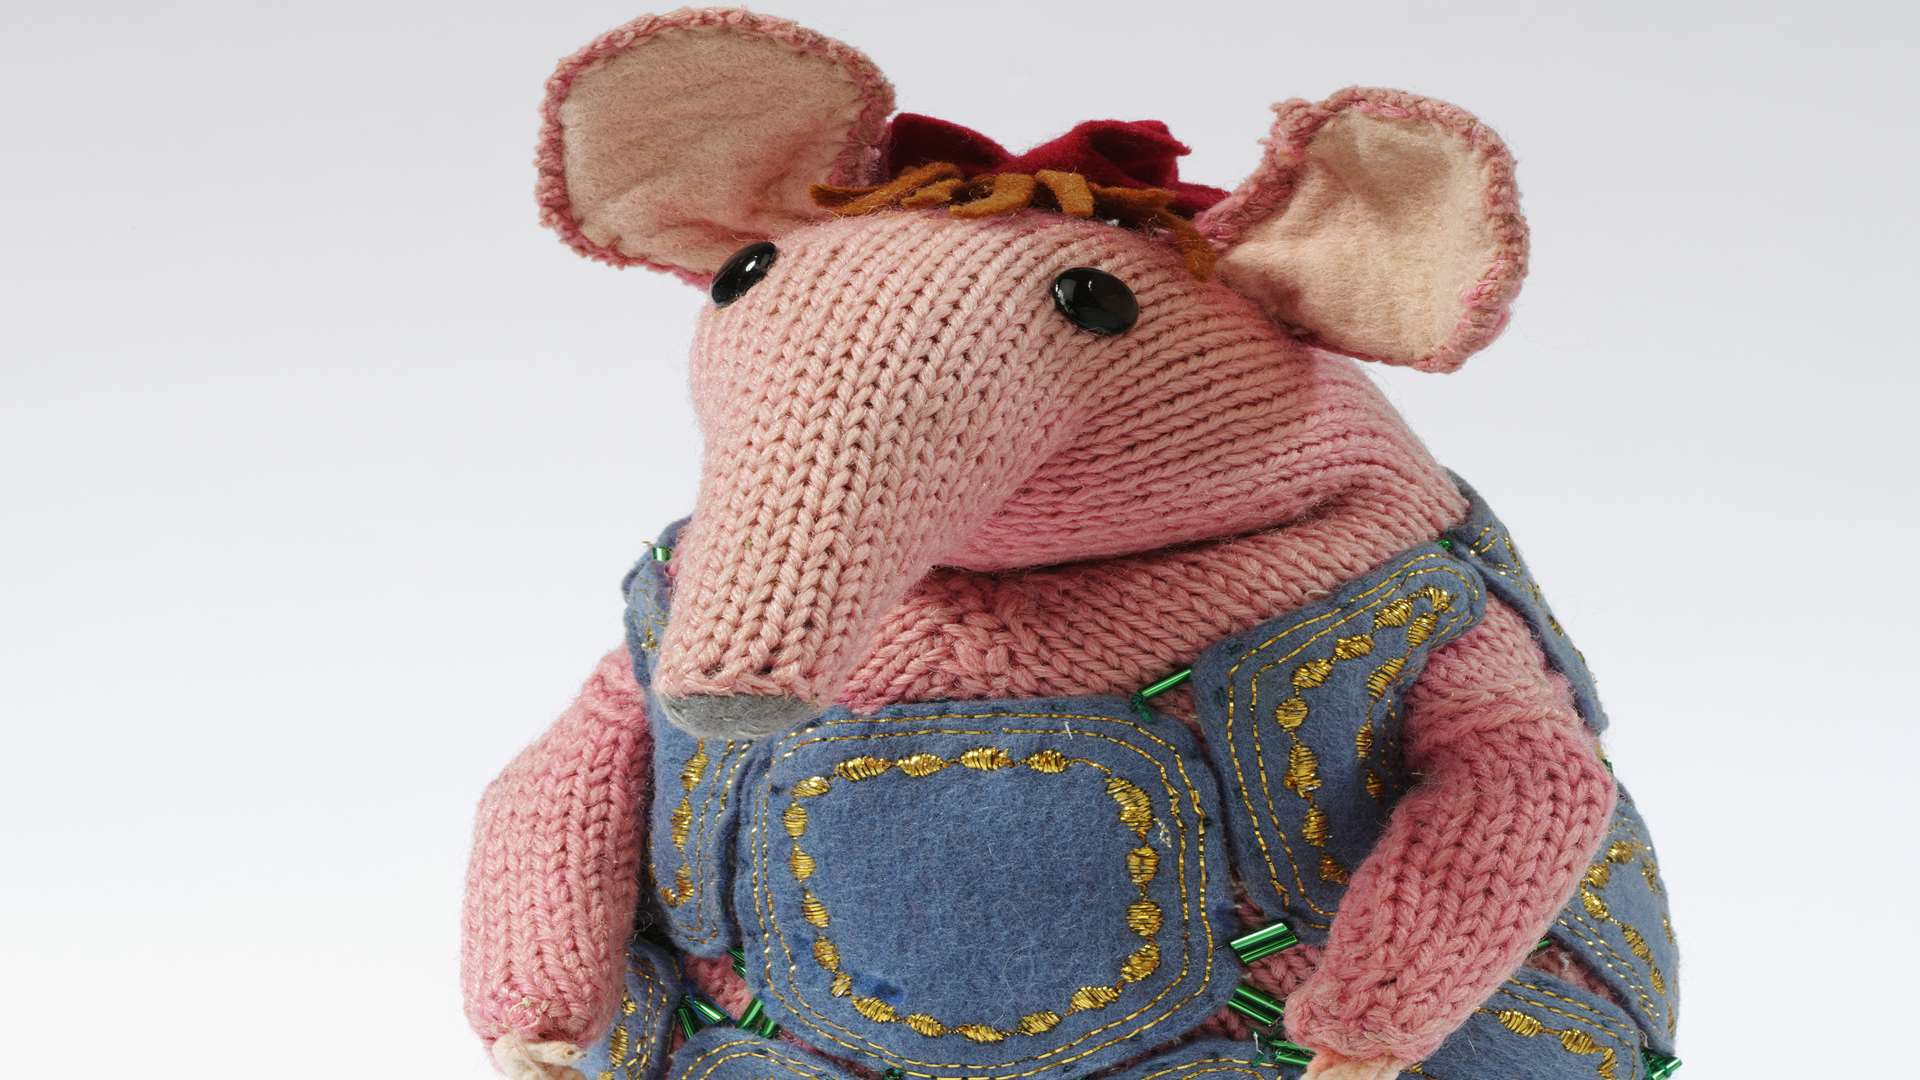 One of The Clangers, who will be at Sissinghurst Castle Garden Picture: ©Smallfilms, ©Victoria and Albert Museum, London